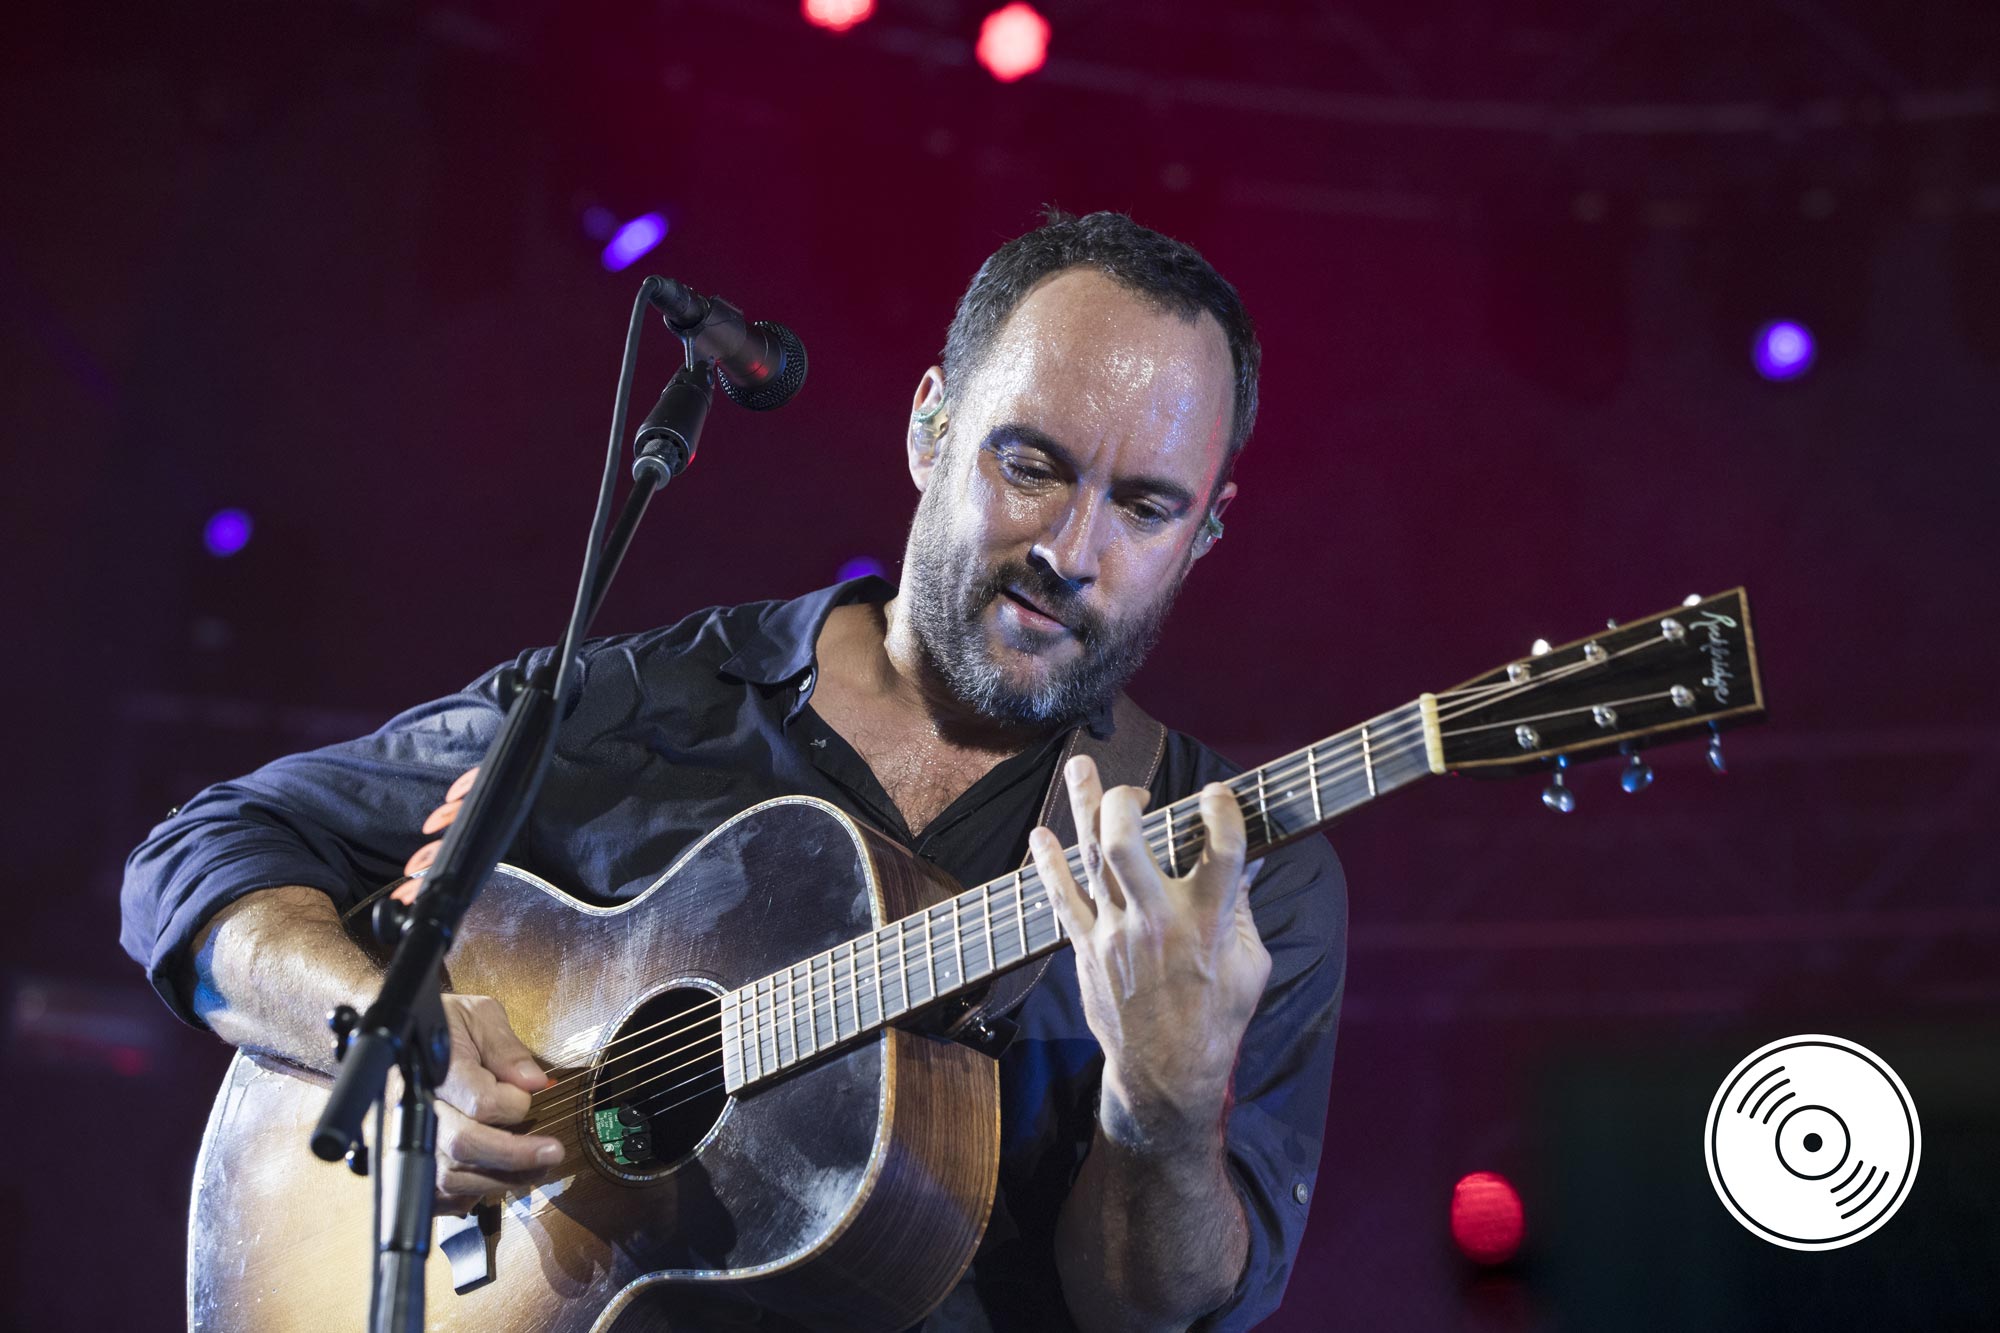 Singer Dave Matthews plays an acoustic guitar onstage in front of a microphone.